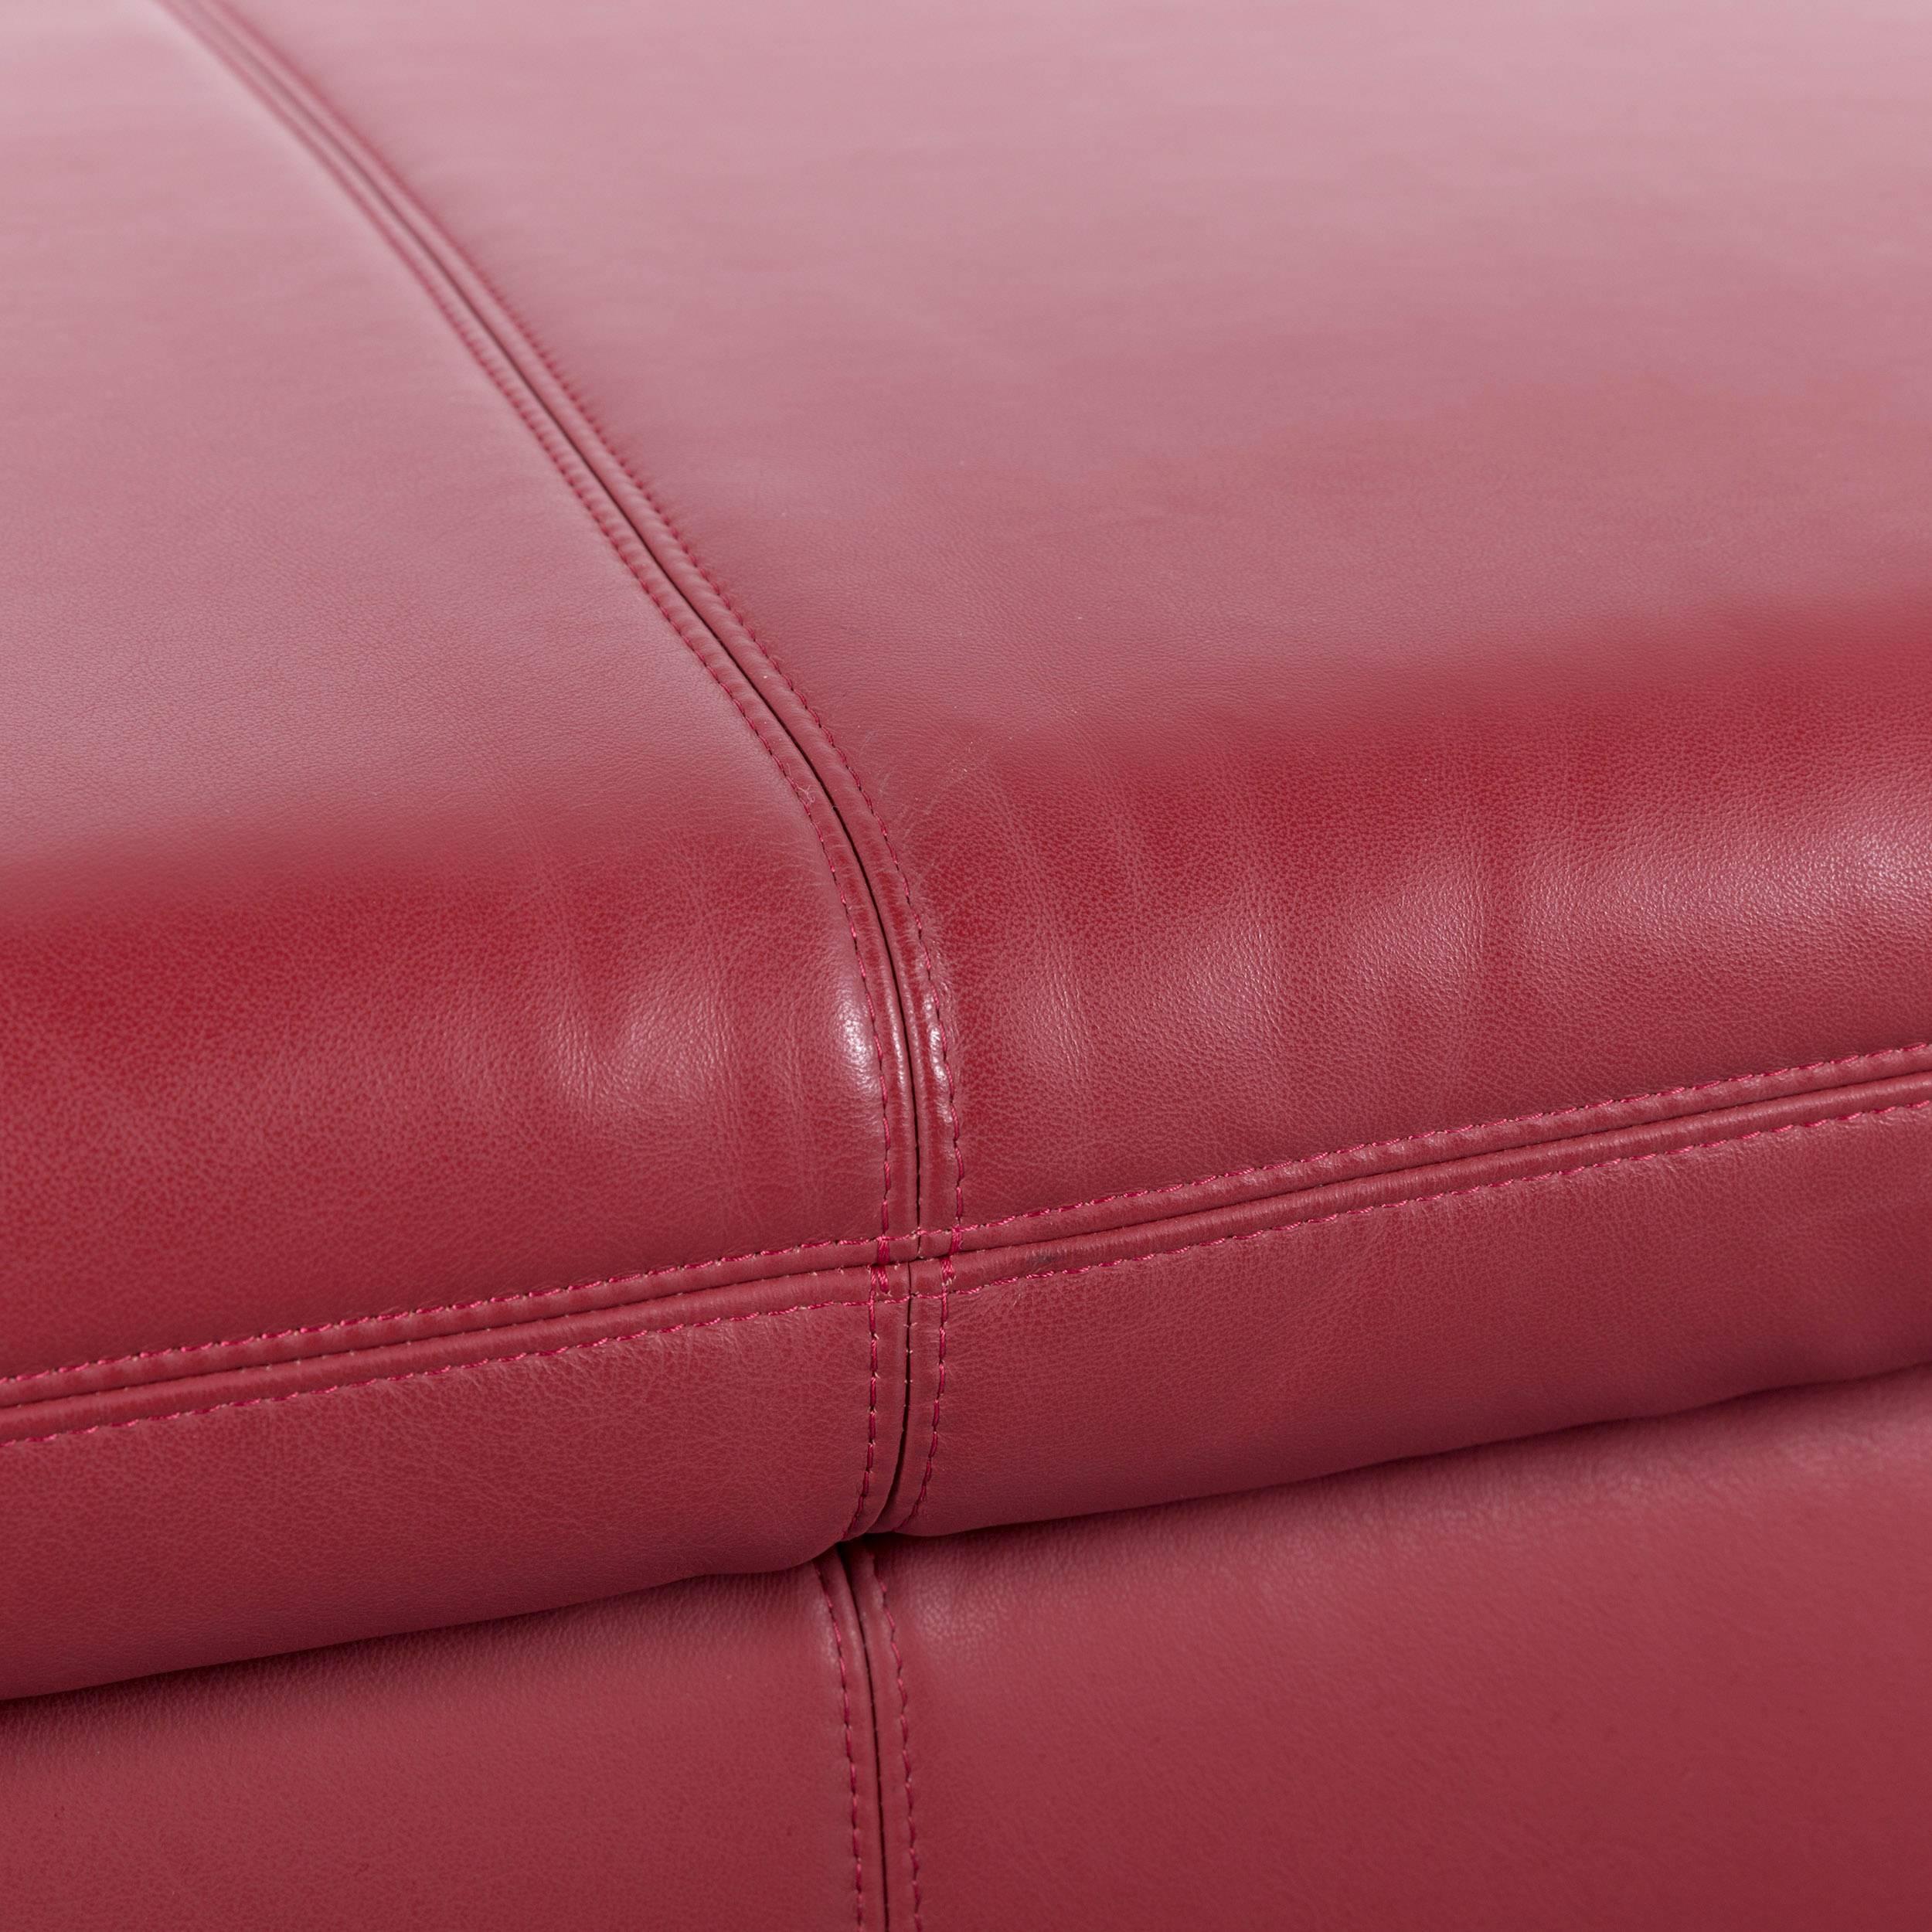 We bring to you an Koinor Rivoli leather foot-stool red bench.
































